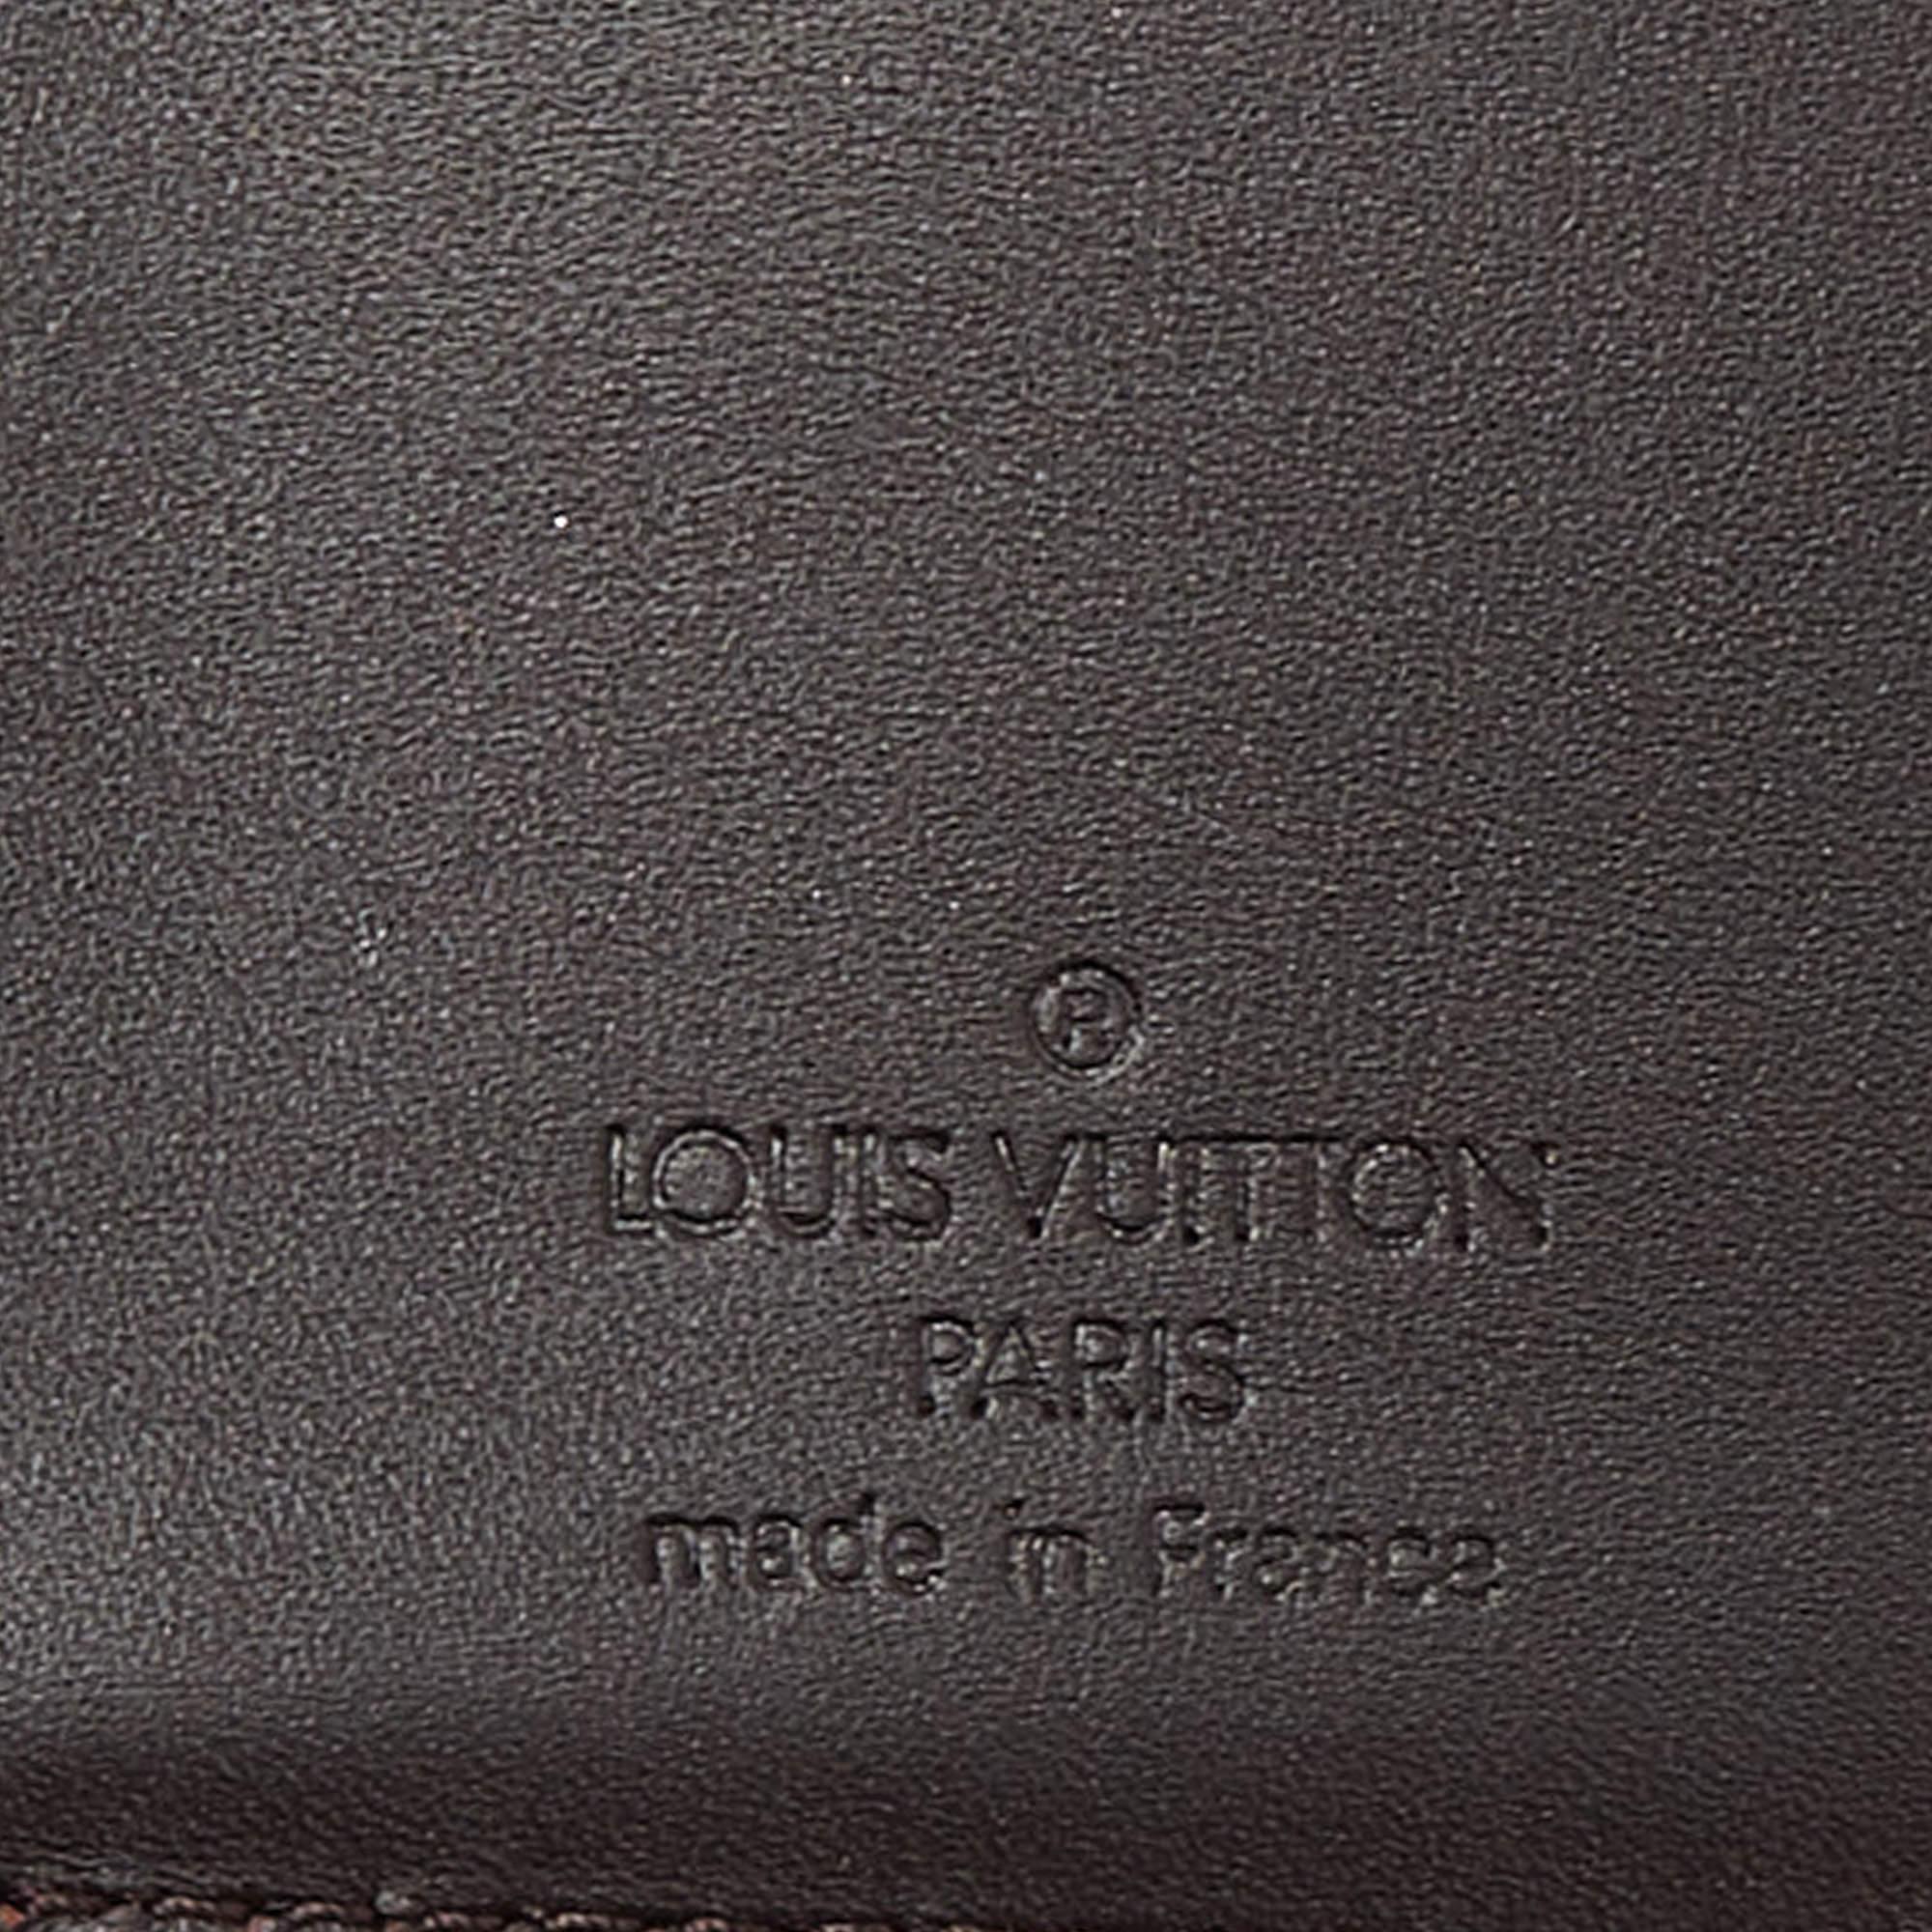 This fabulous French wallet from the house of Louis Vuitton is functional and stylish. It is made from classic Amarante monogram Vernis and lined with leather on the insides. The buttoned closure opens to multiple card slots, open compartments to